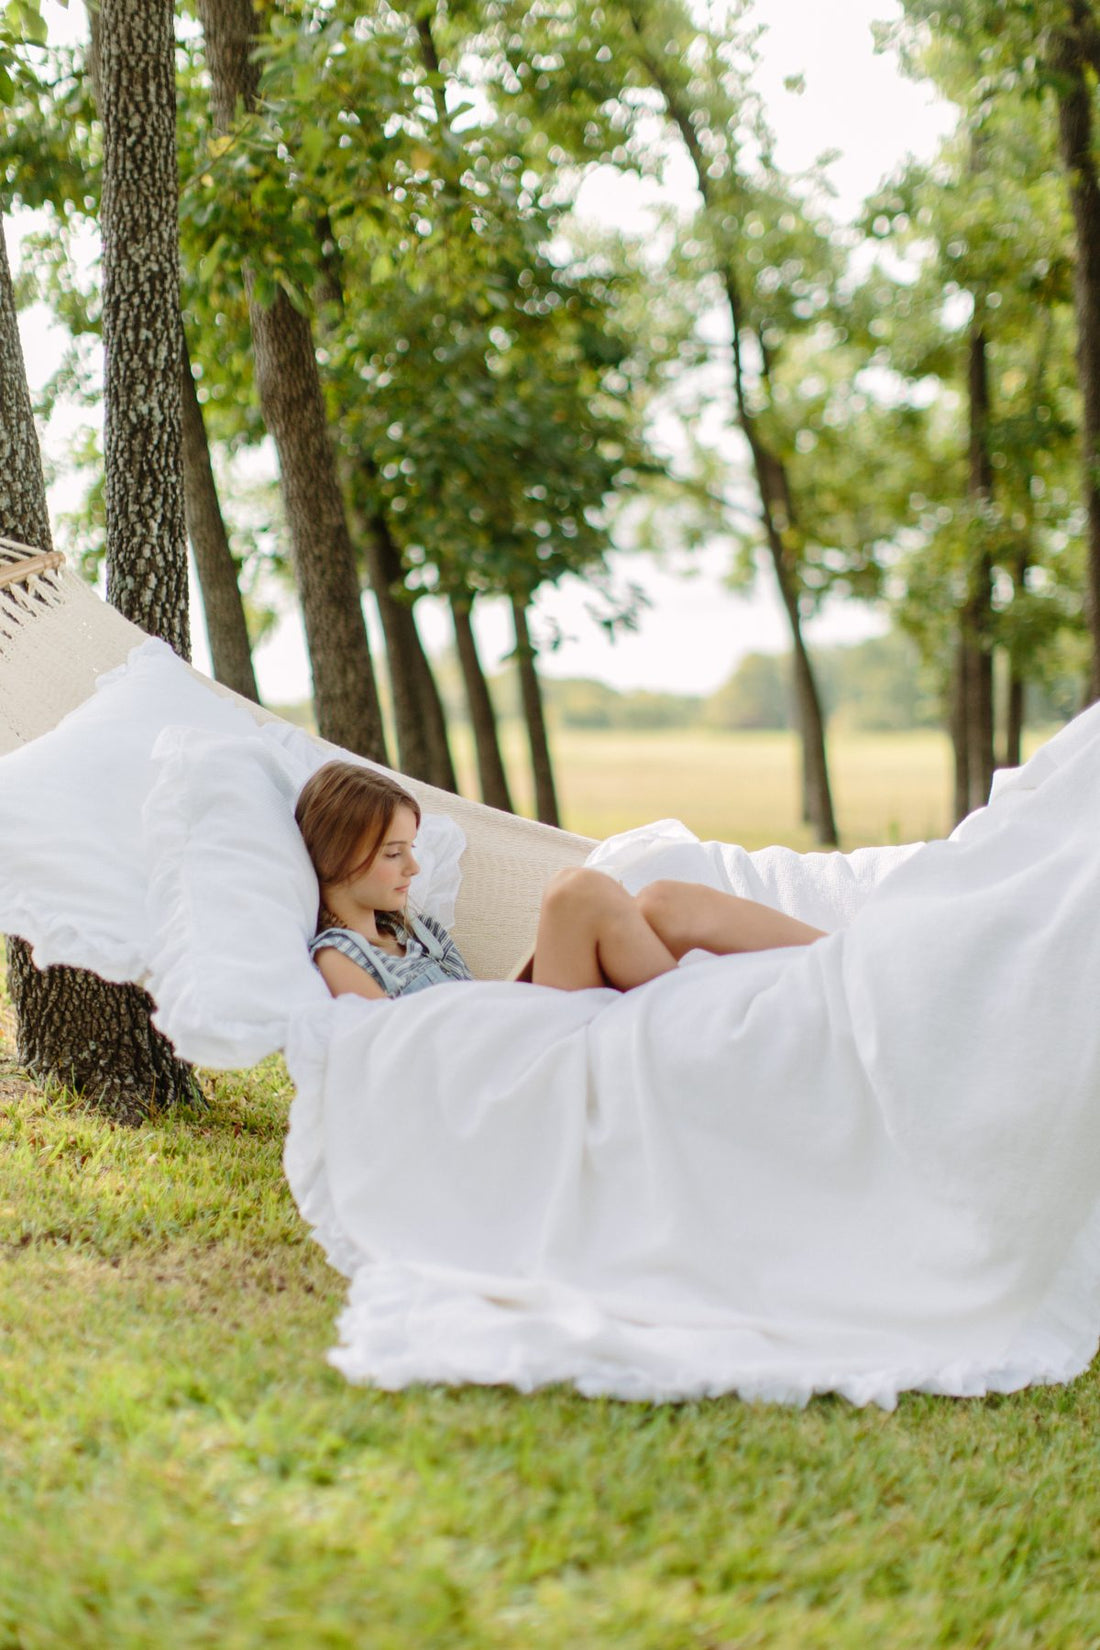 Young girl reading on a hammock with a ruffled white duvet